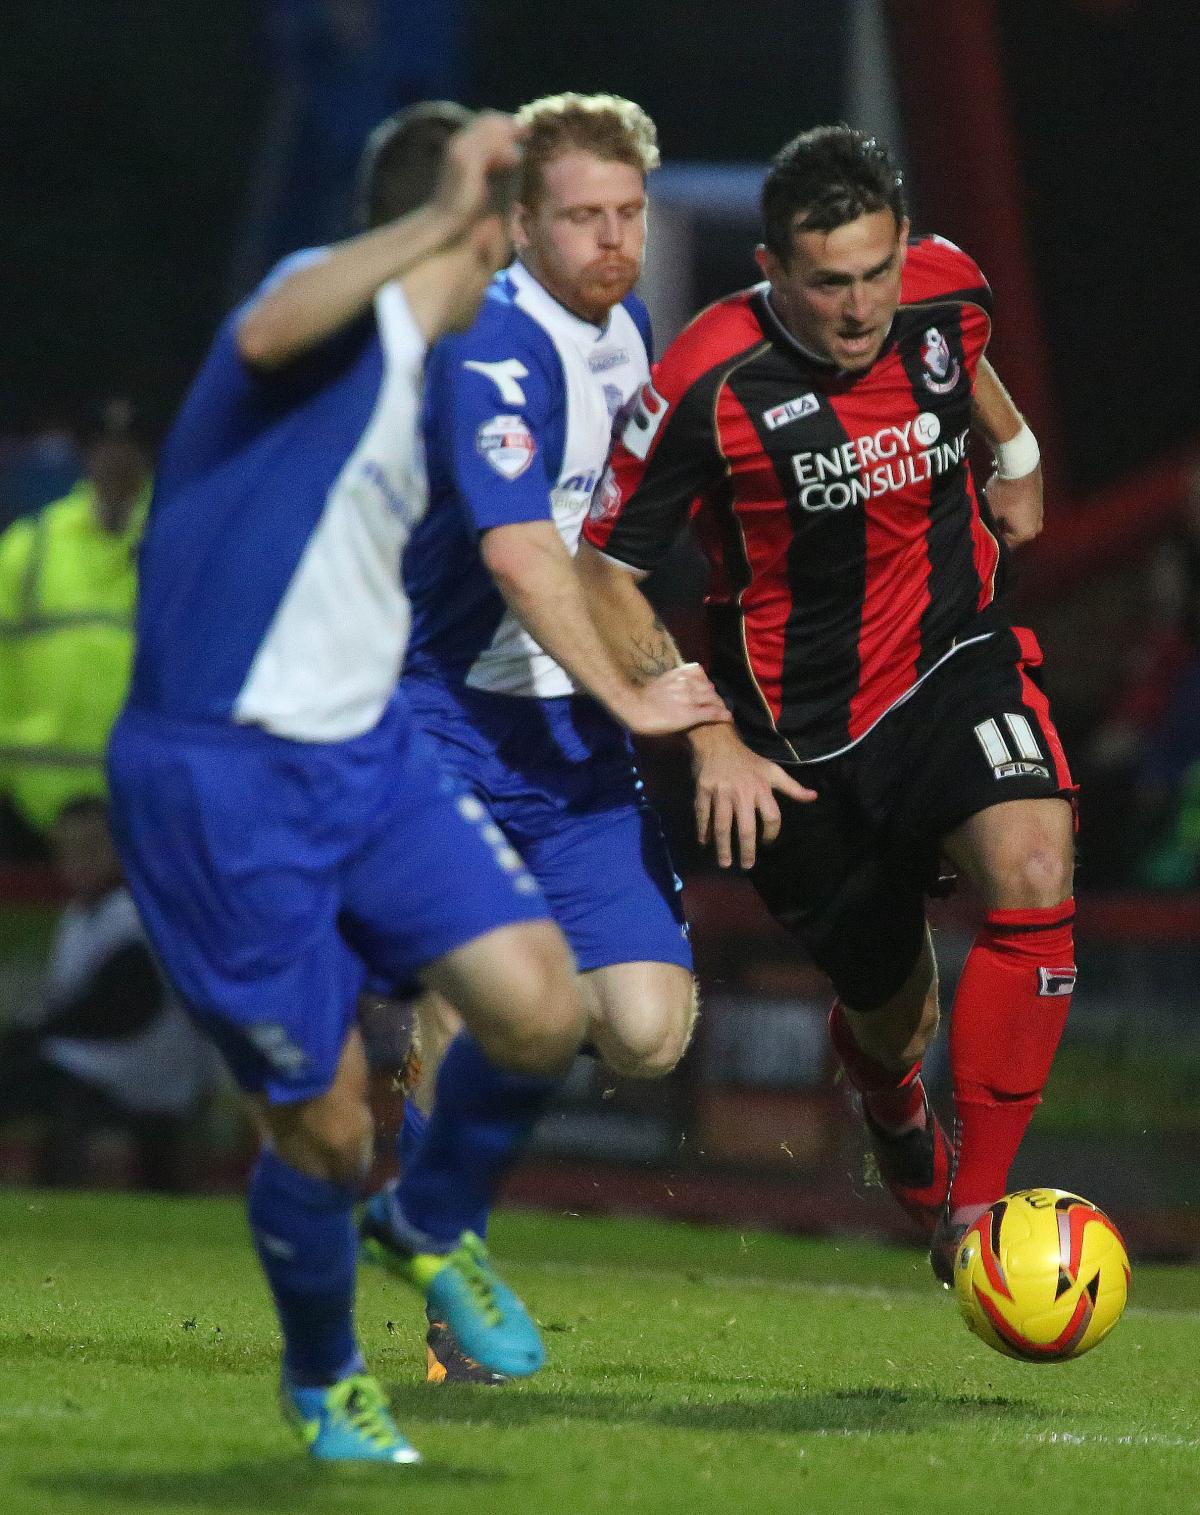 See all our pictures from the AFC Bournemouth v Birmingham City game on Saturday December 14, 2013